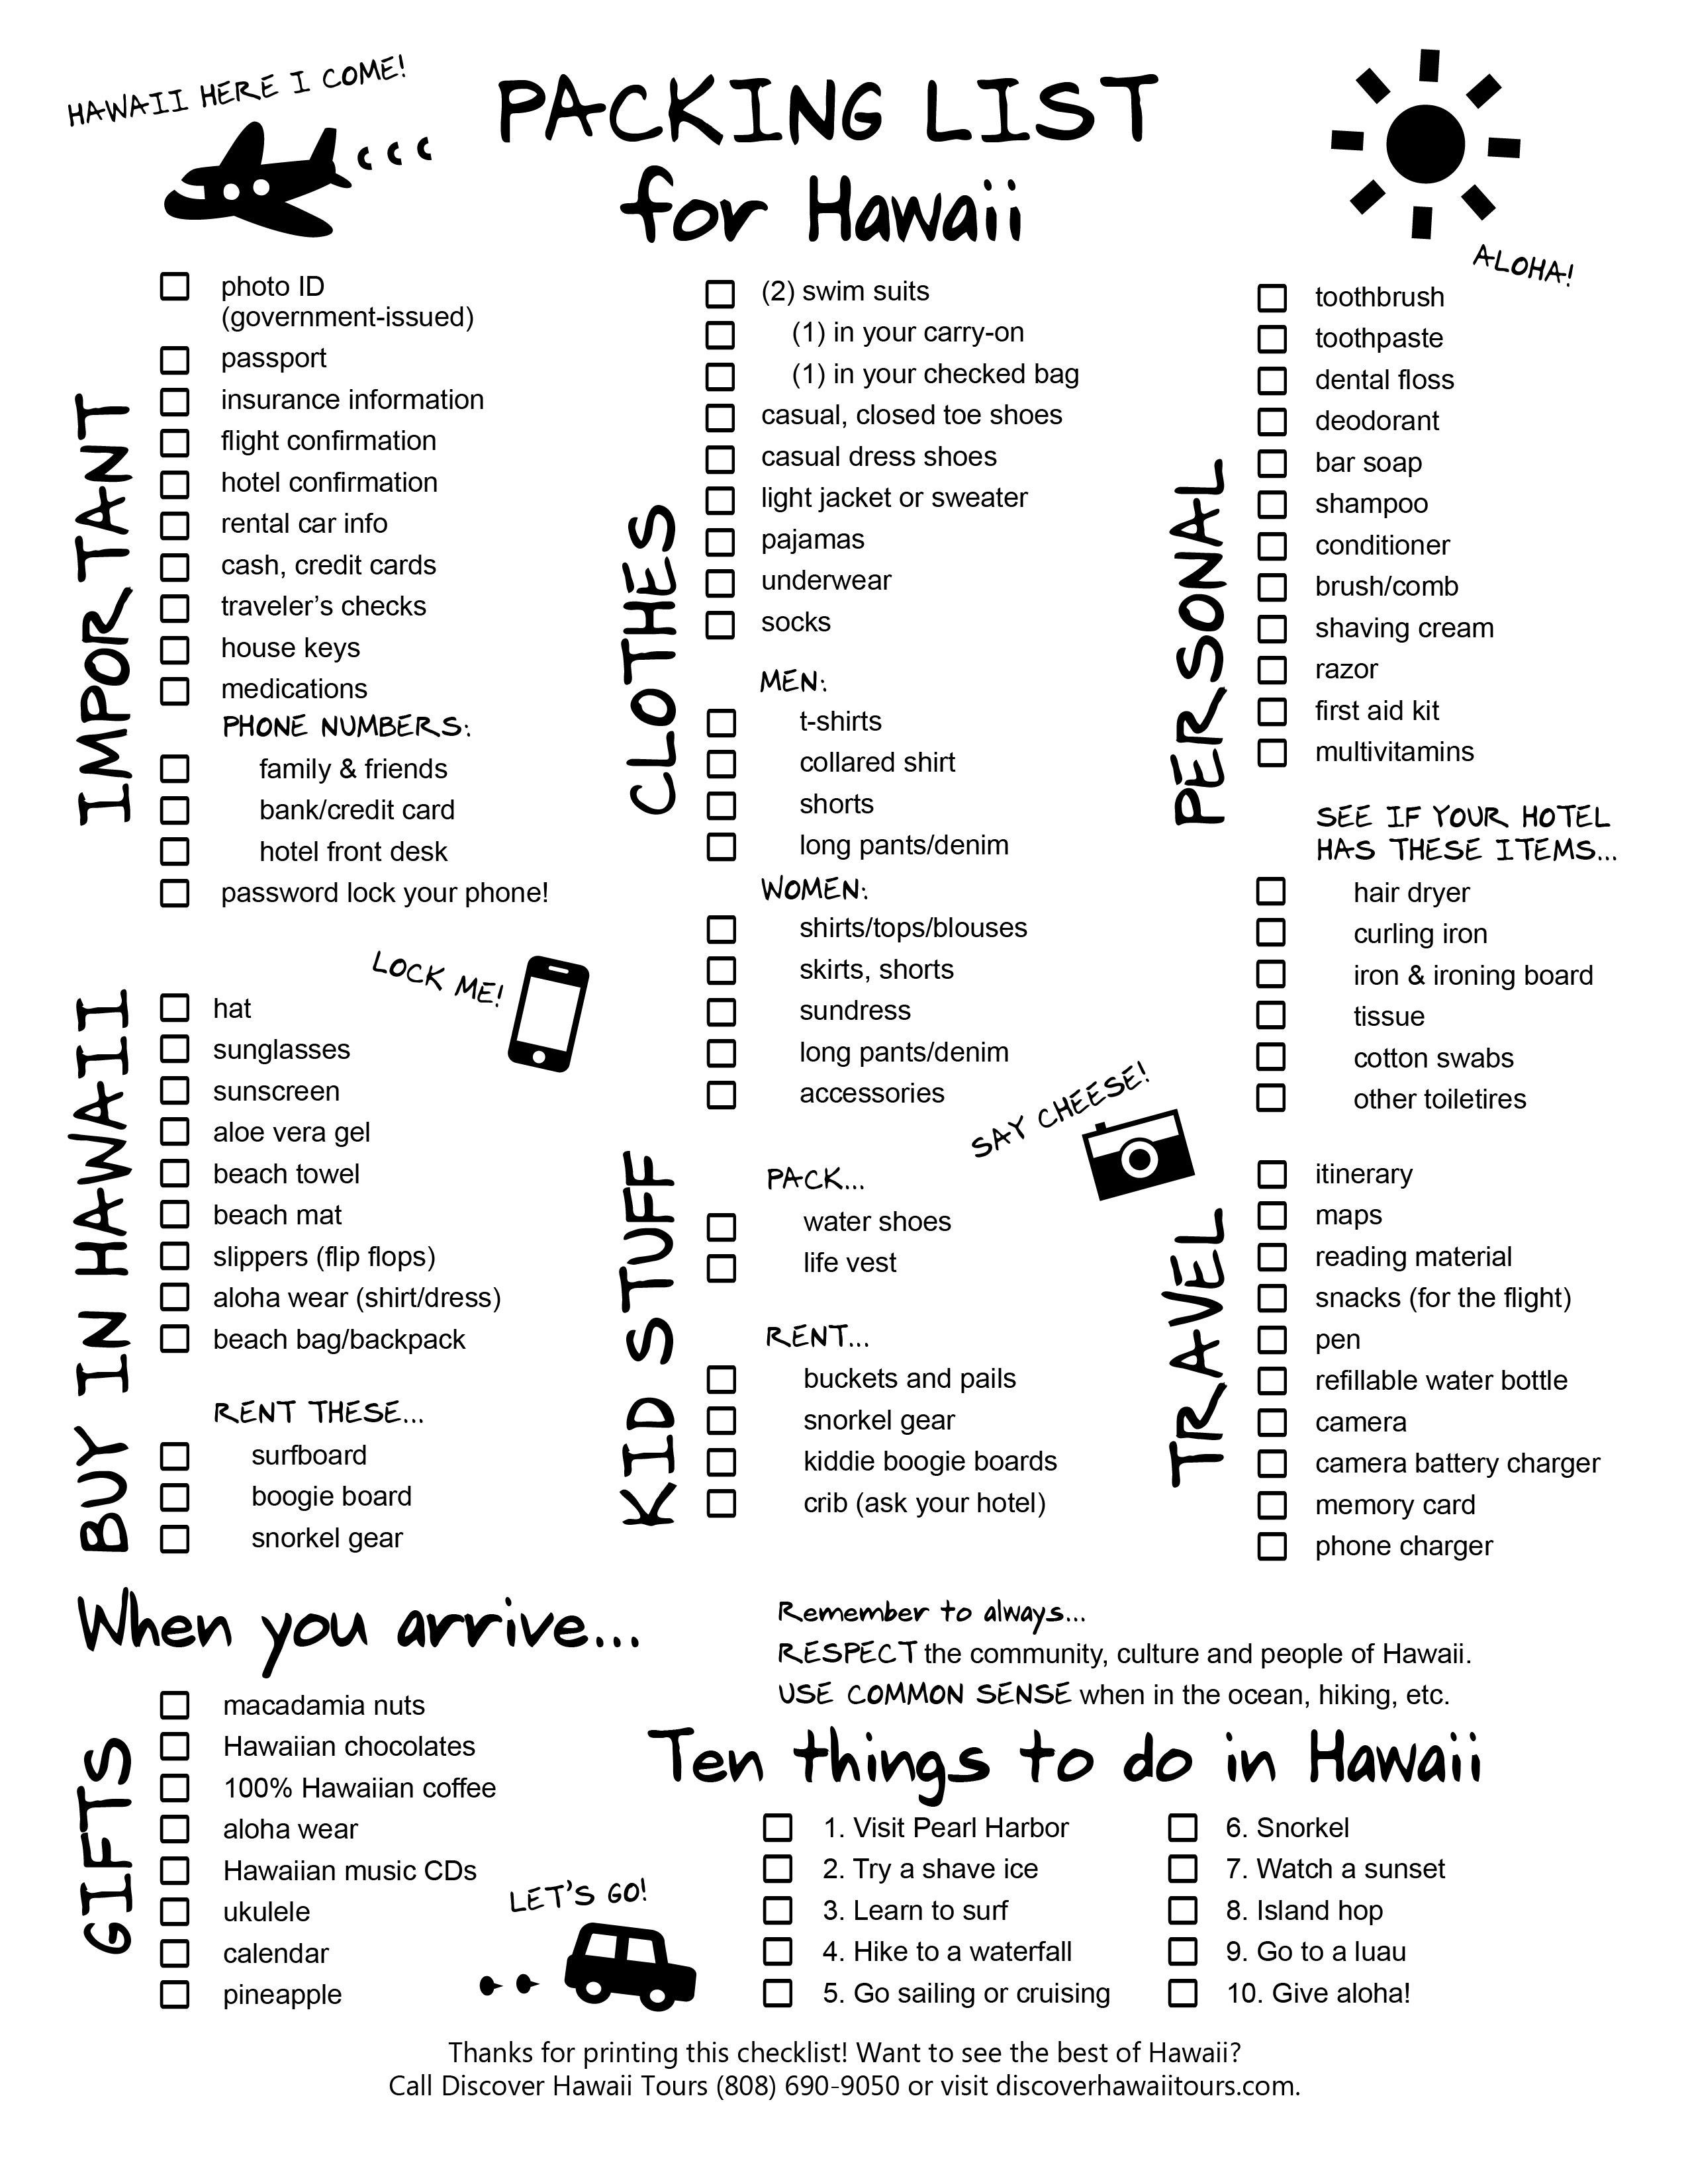 PRINT THIS HAWAII PACKING LIST!! – Packing is dreaded by many, but mastered by f